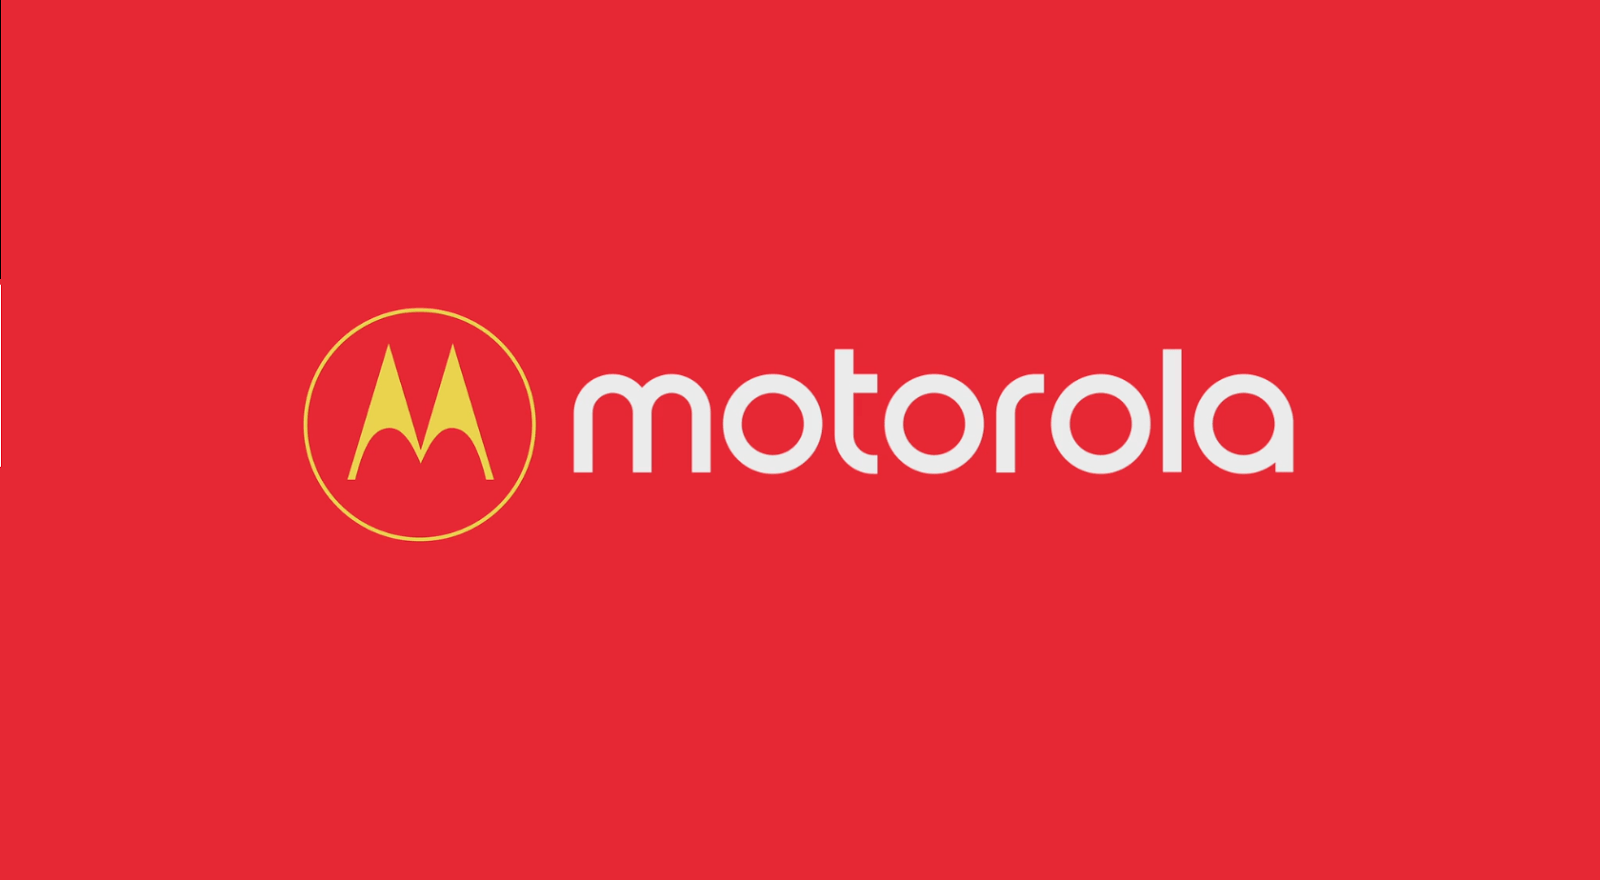 New Motorola Logo - June 27th came and there was no new Moto Z